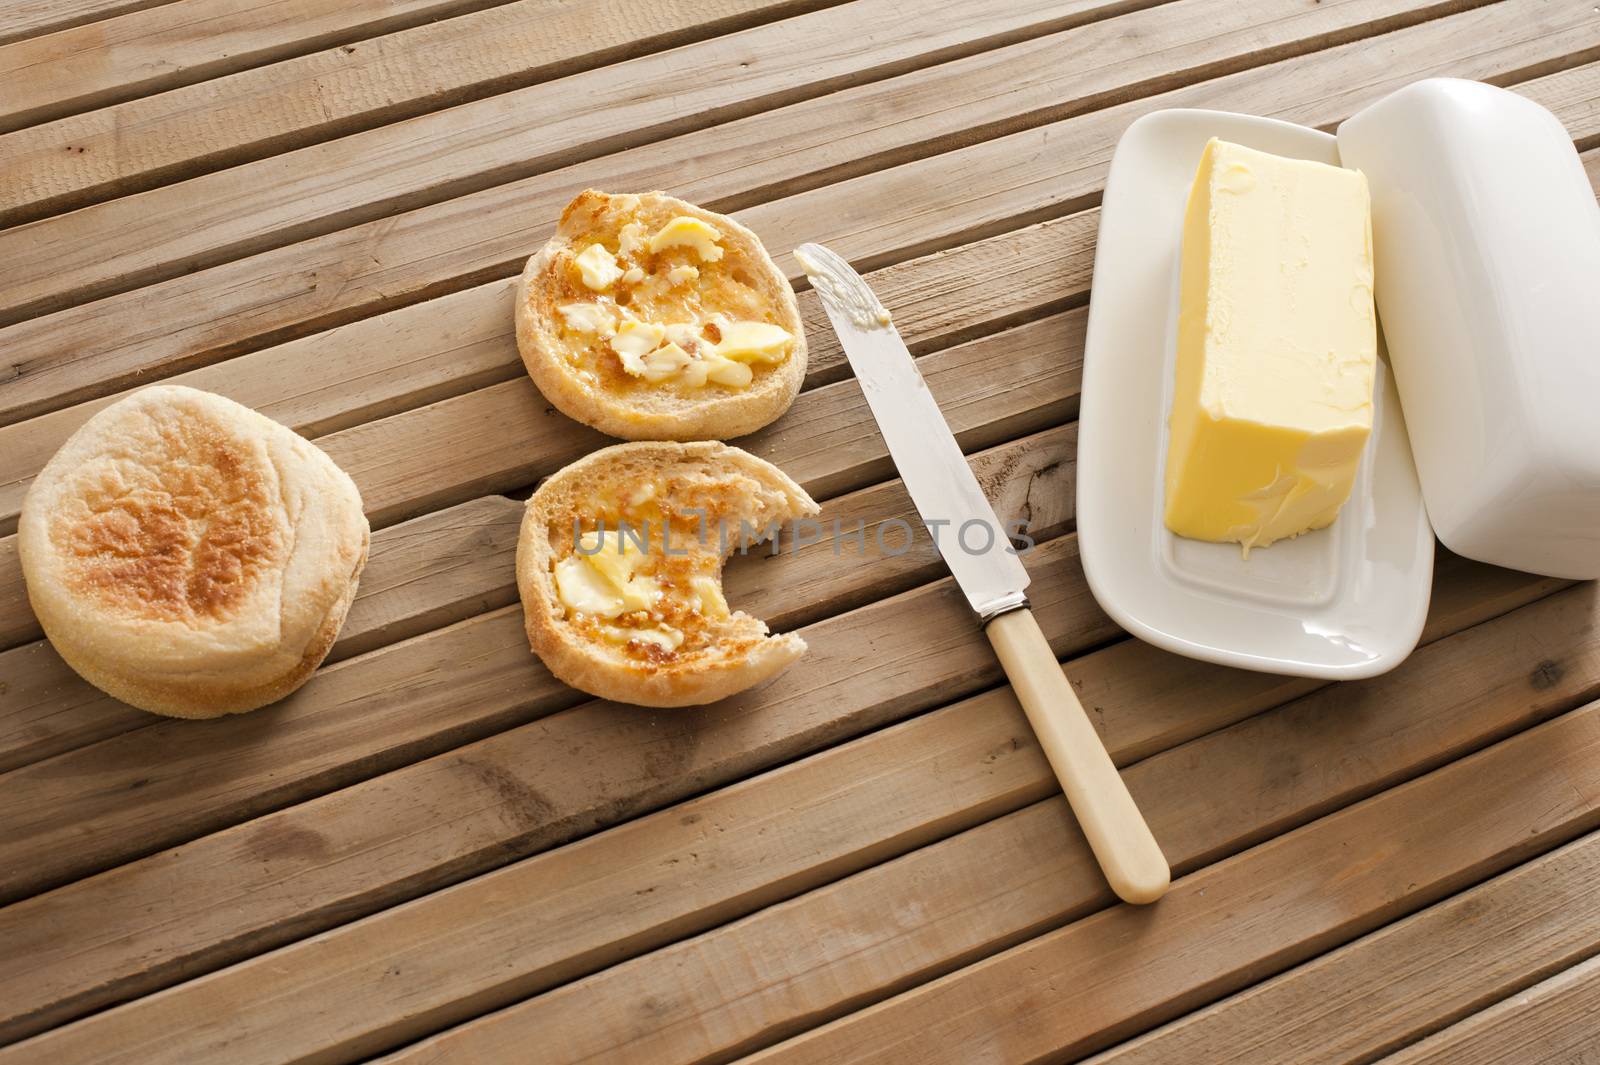 Buttered crumpets with a pat of farm butter by stockarch